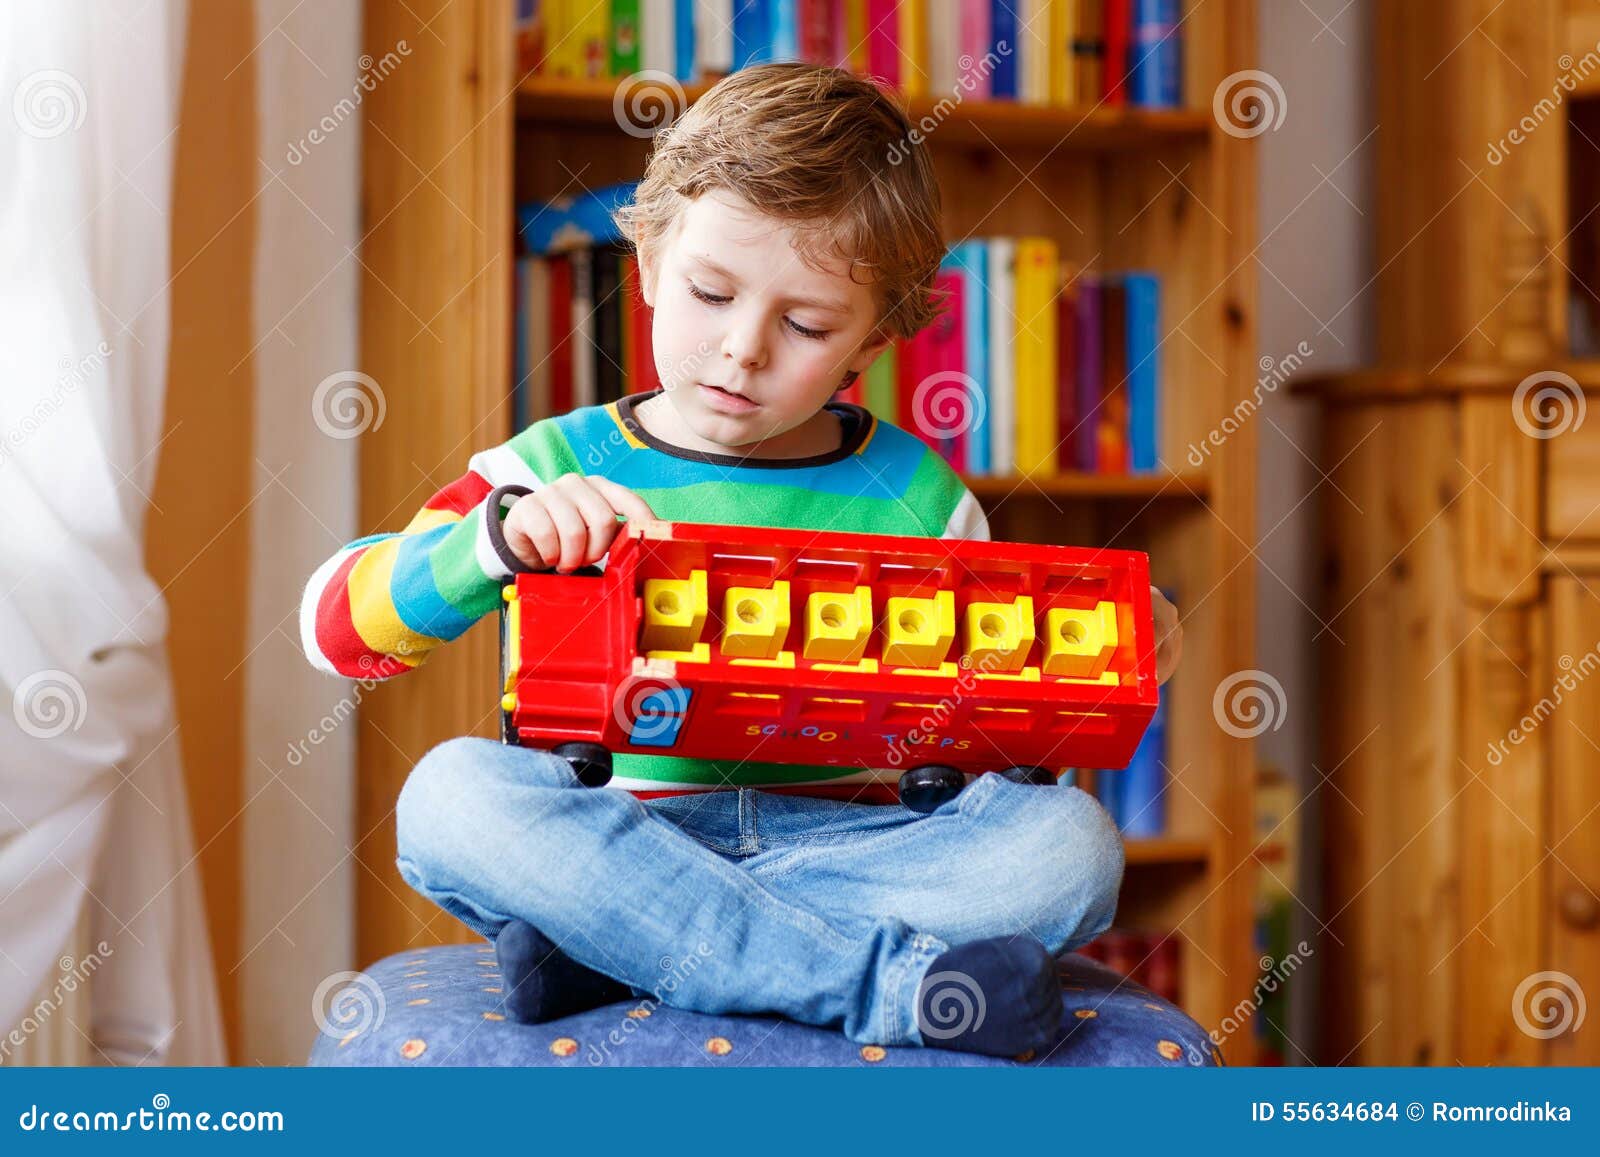 Little blond kid boy playing with wooden toy bus, indoors. Active kid boy playing with wooden toy bus, indoors. Child wearing colorful shirt. Portrait in a daycare.